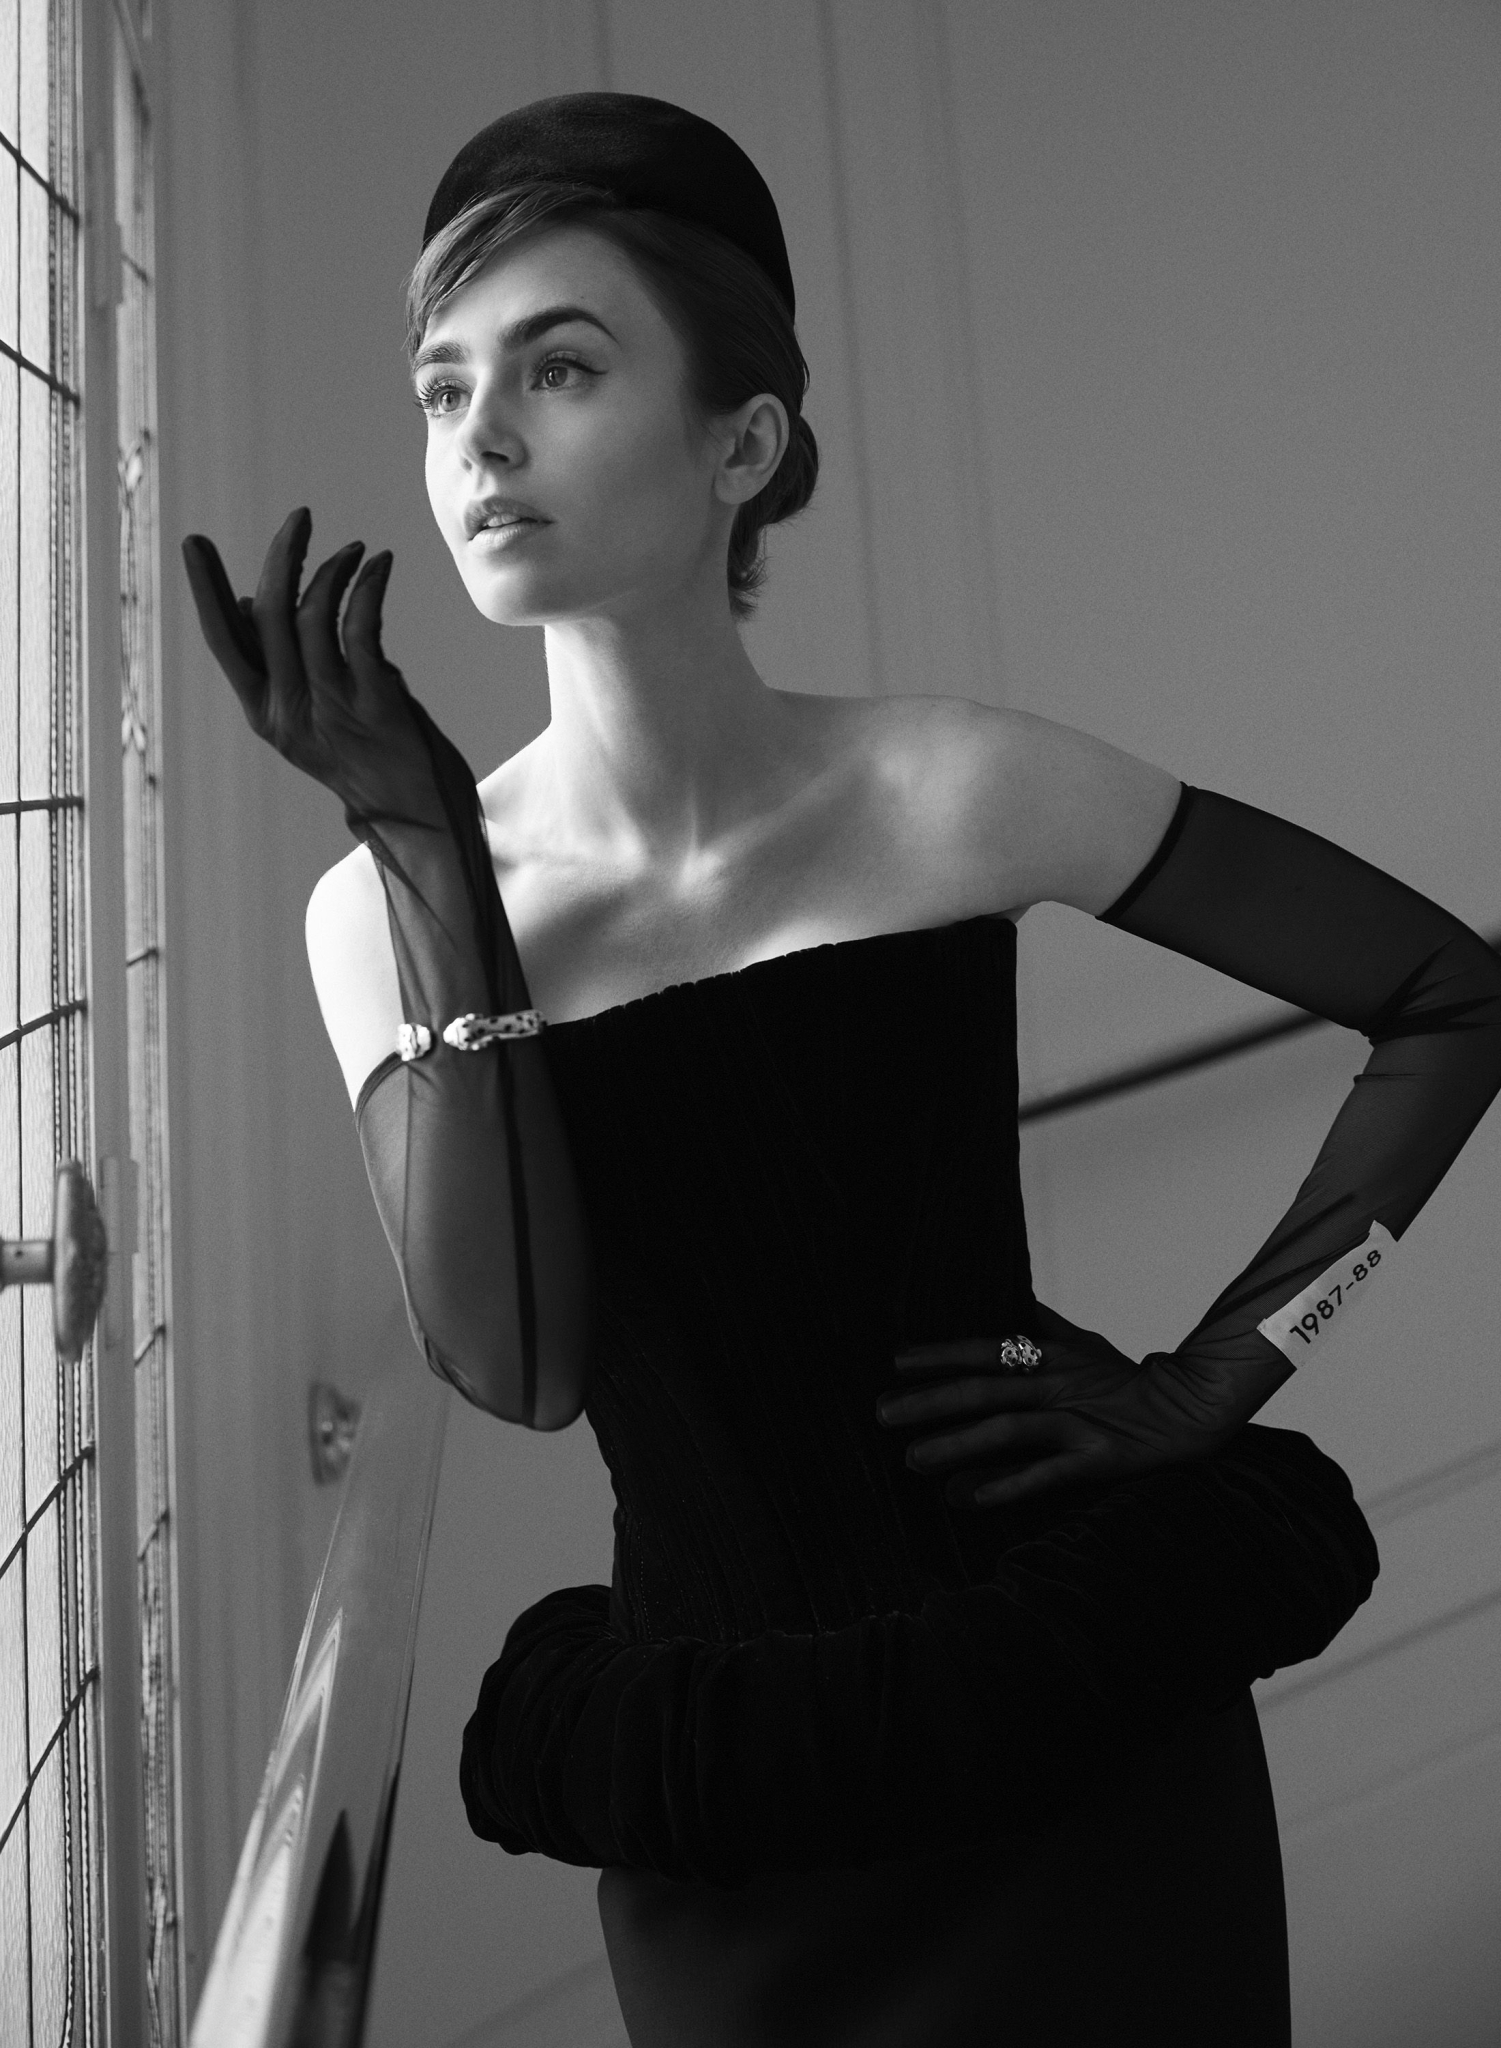 339012397_20230131-harpers-lilycollins0316-1677568542.jpg